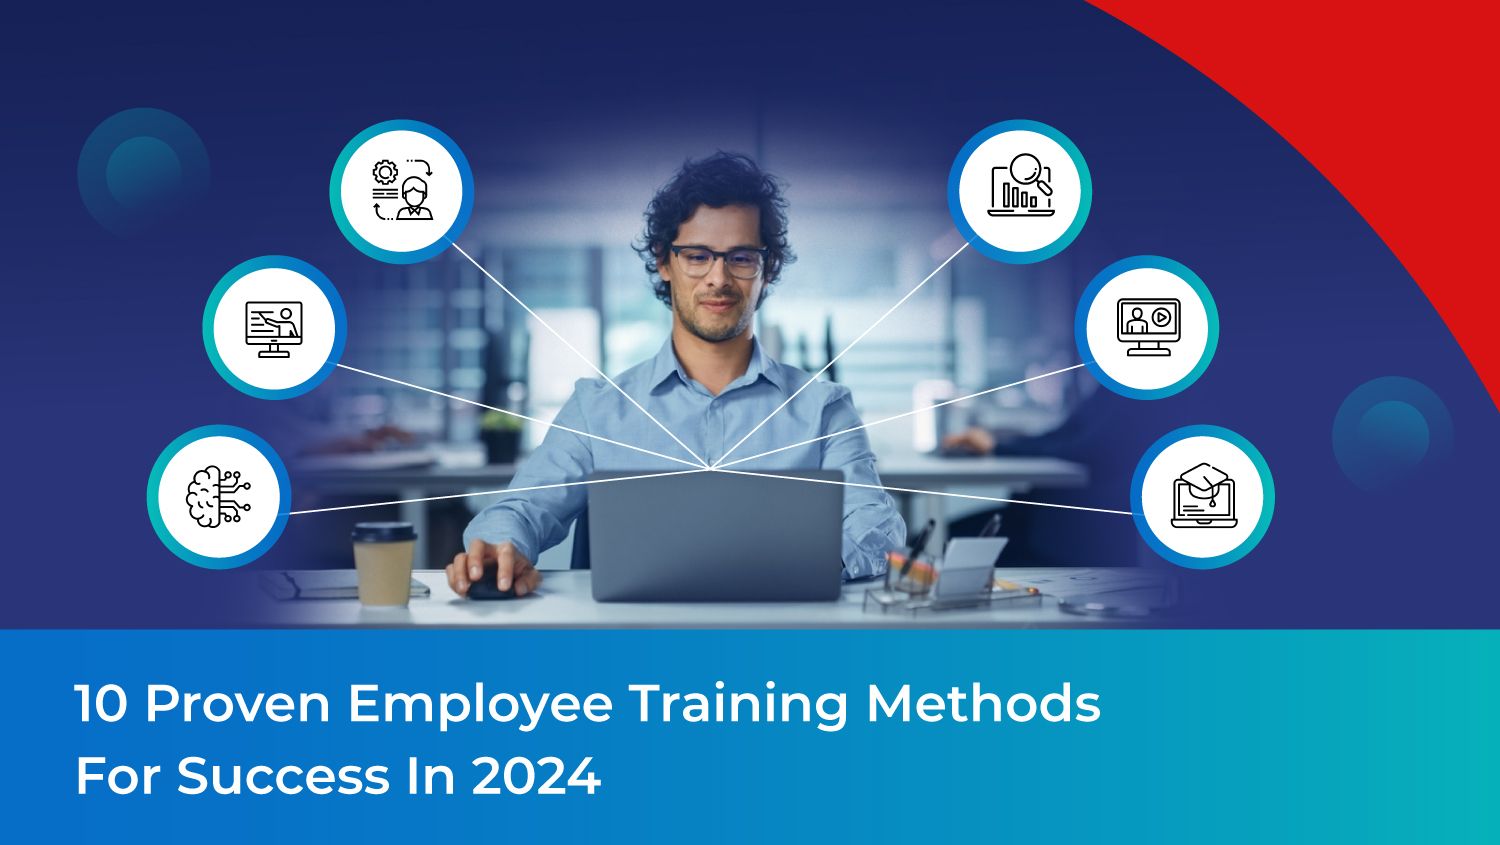 10 Proven Employee Training Methods for Success in 2024